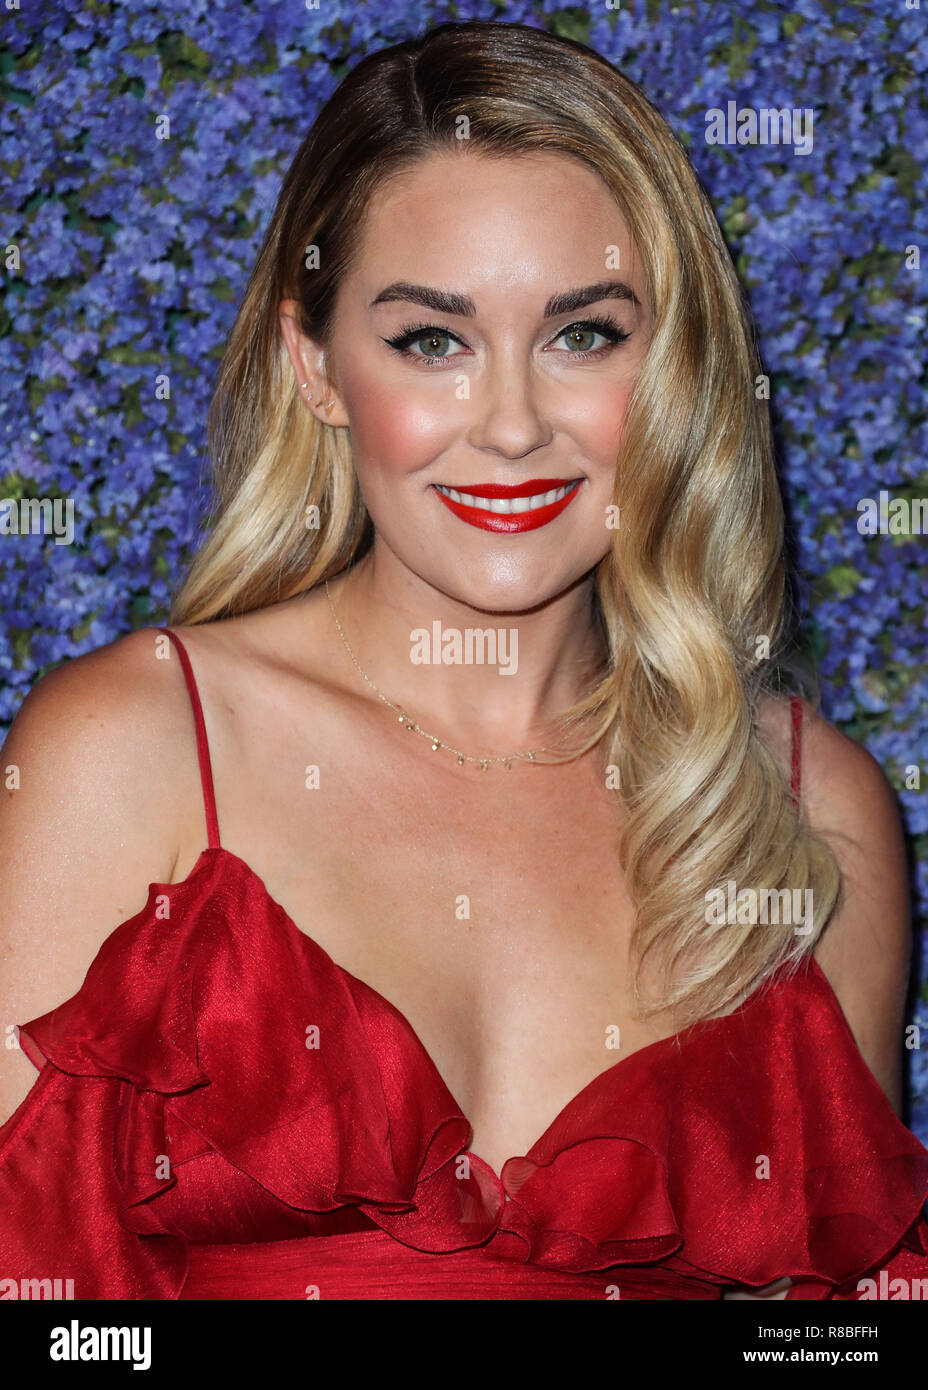 15,520 Lauren Conrad Images Stock Photos, High-Res Pictures, and